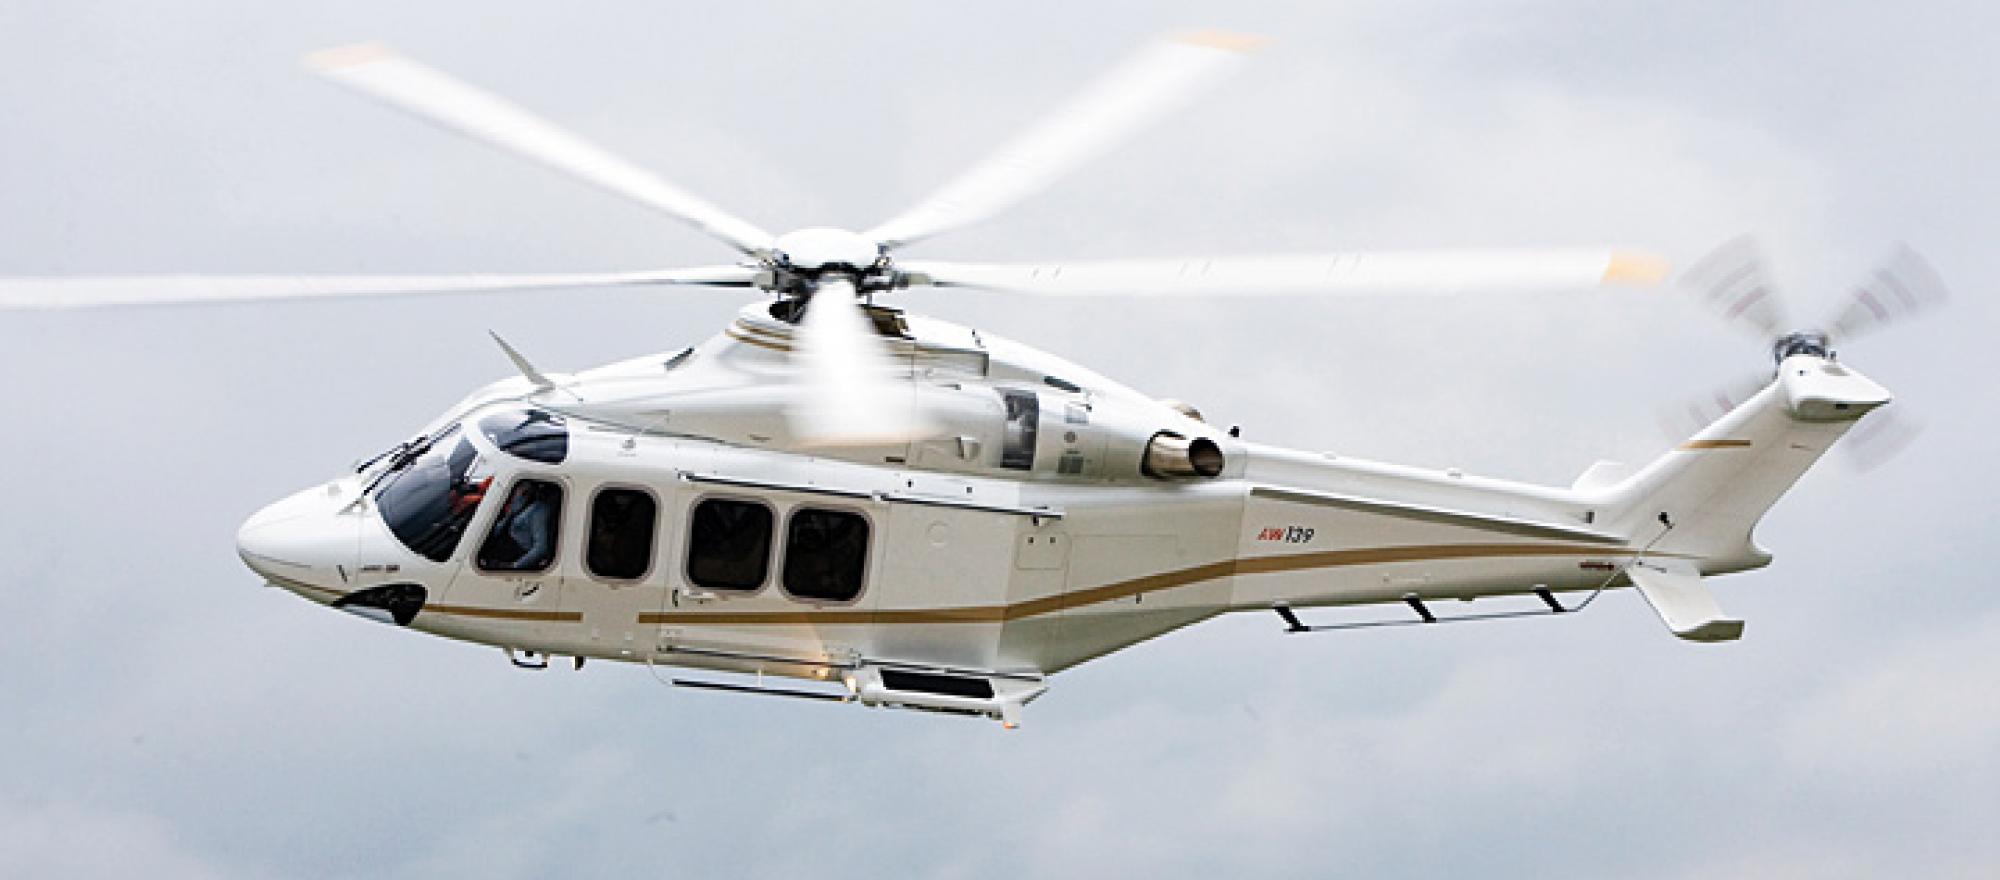 Most of the used AW139s on the market aren’t in executive livery, so you may 